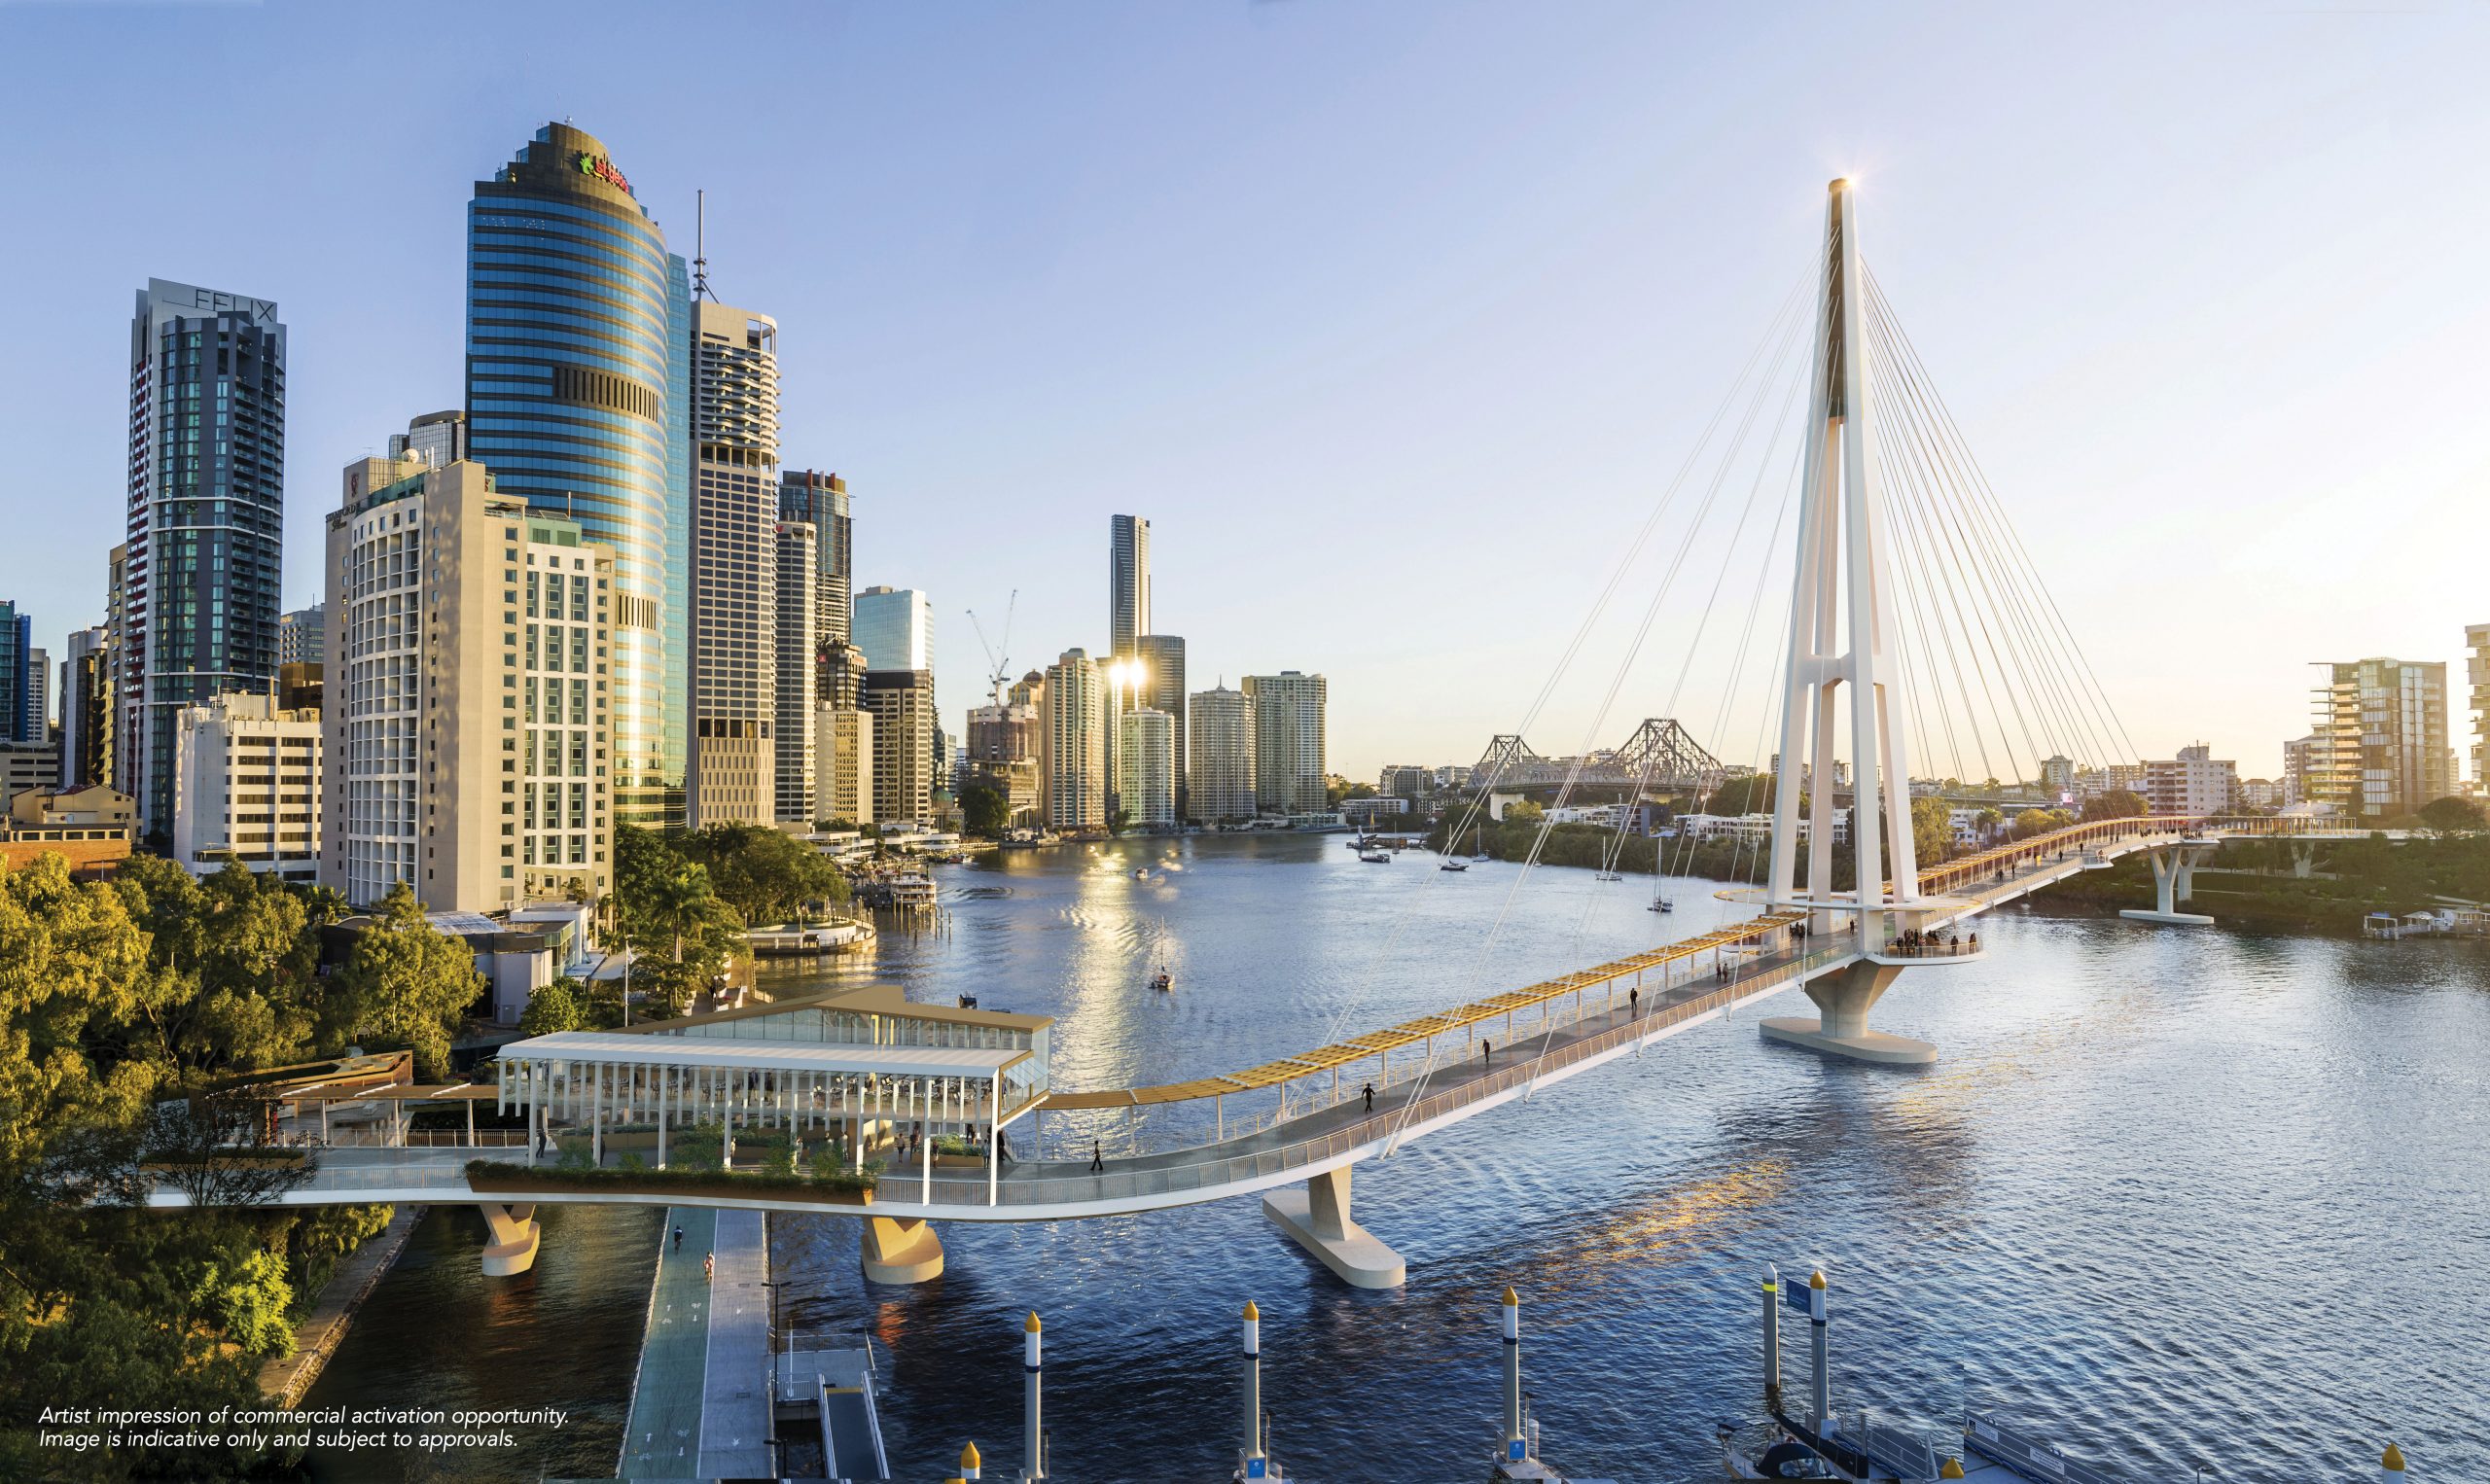 Clean and Green win as Brisbane's River named world’s first resilient river